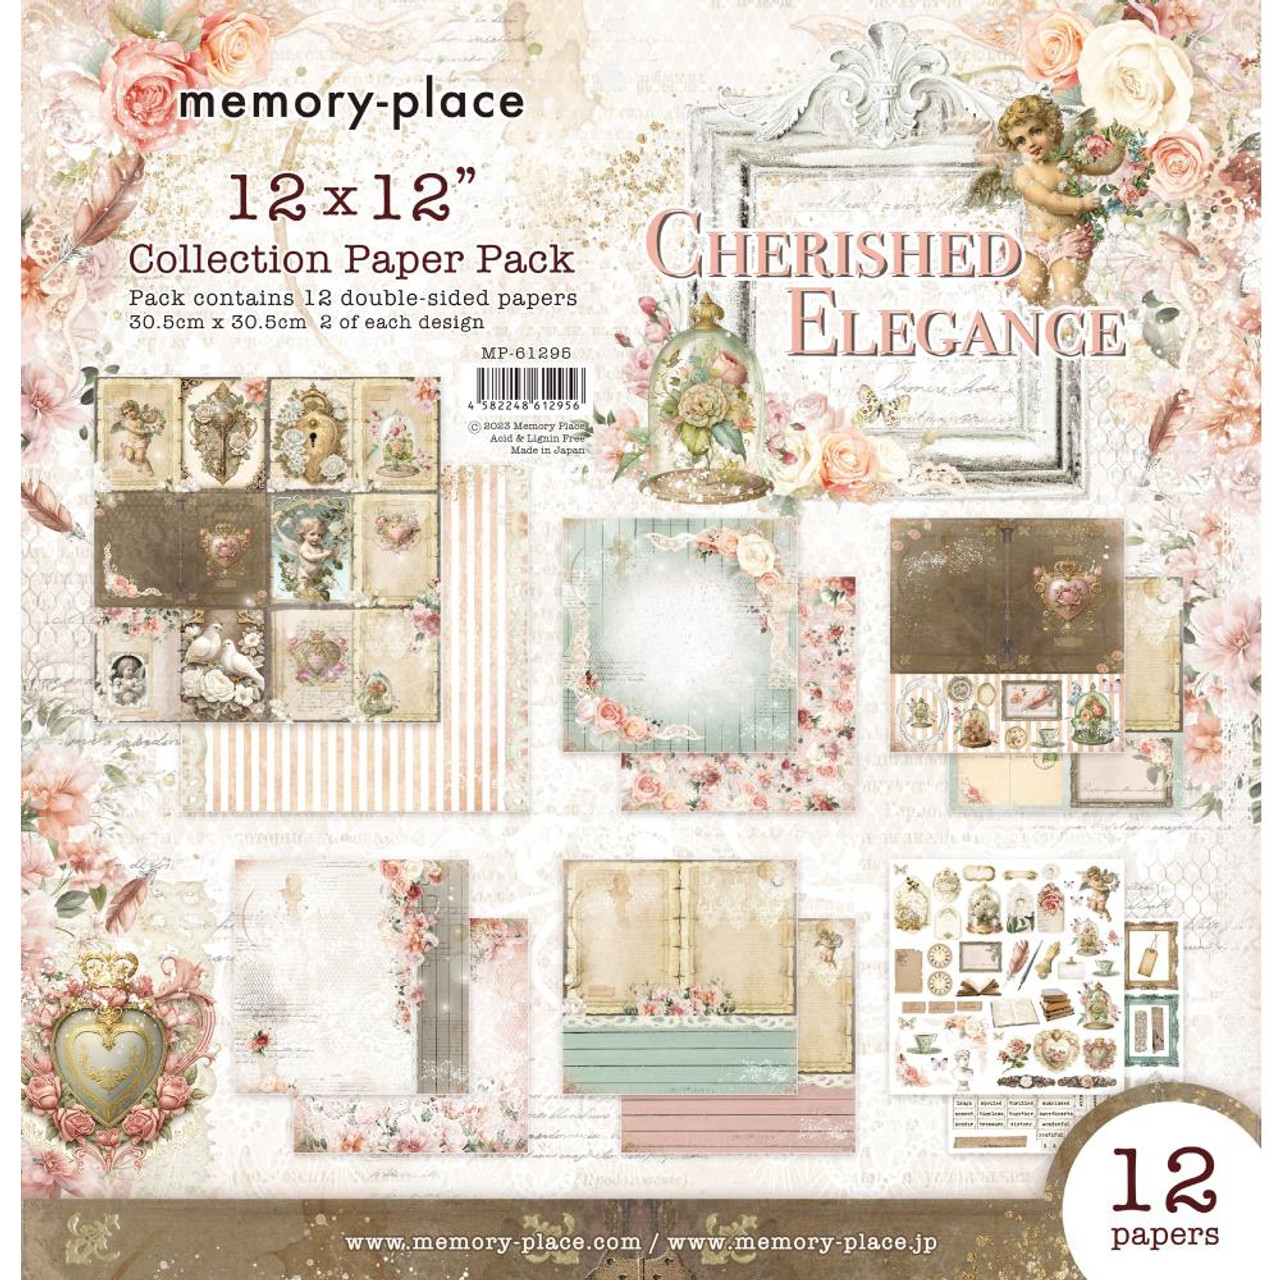 SIMPLE STORIES Color Vibe 12x12 Textured Cardstock Kit: Spring - Scrapbook  Generation